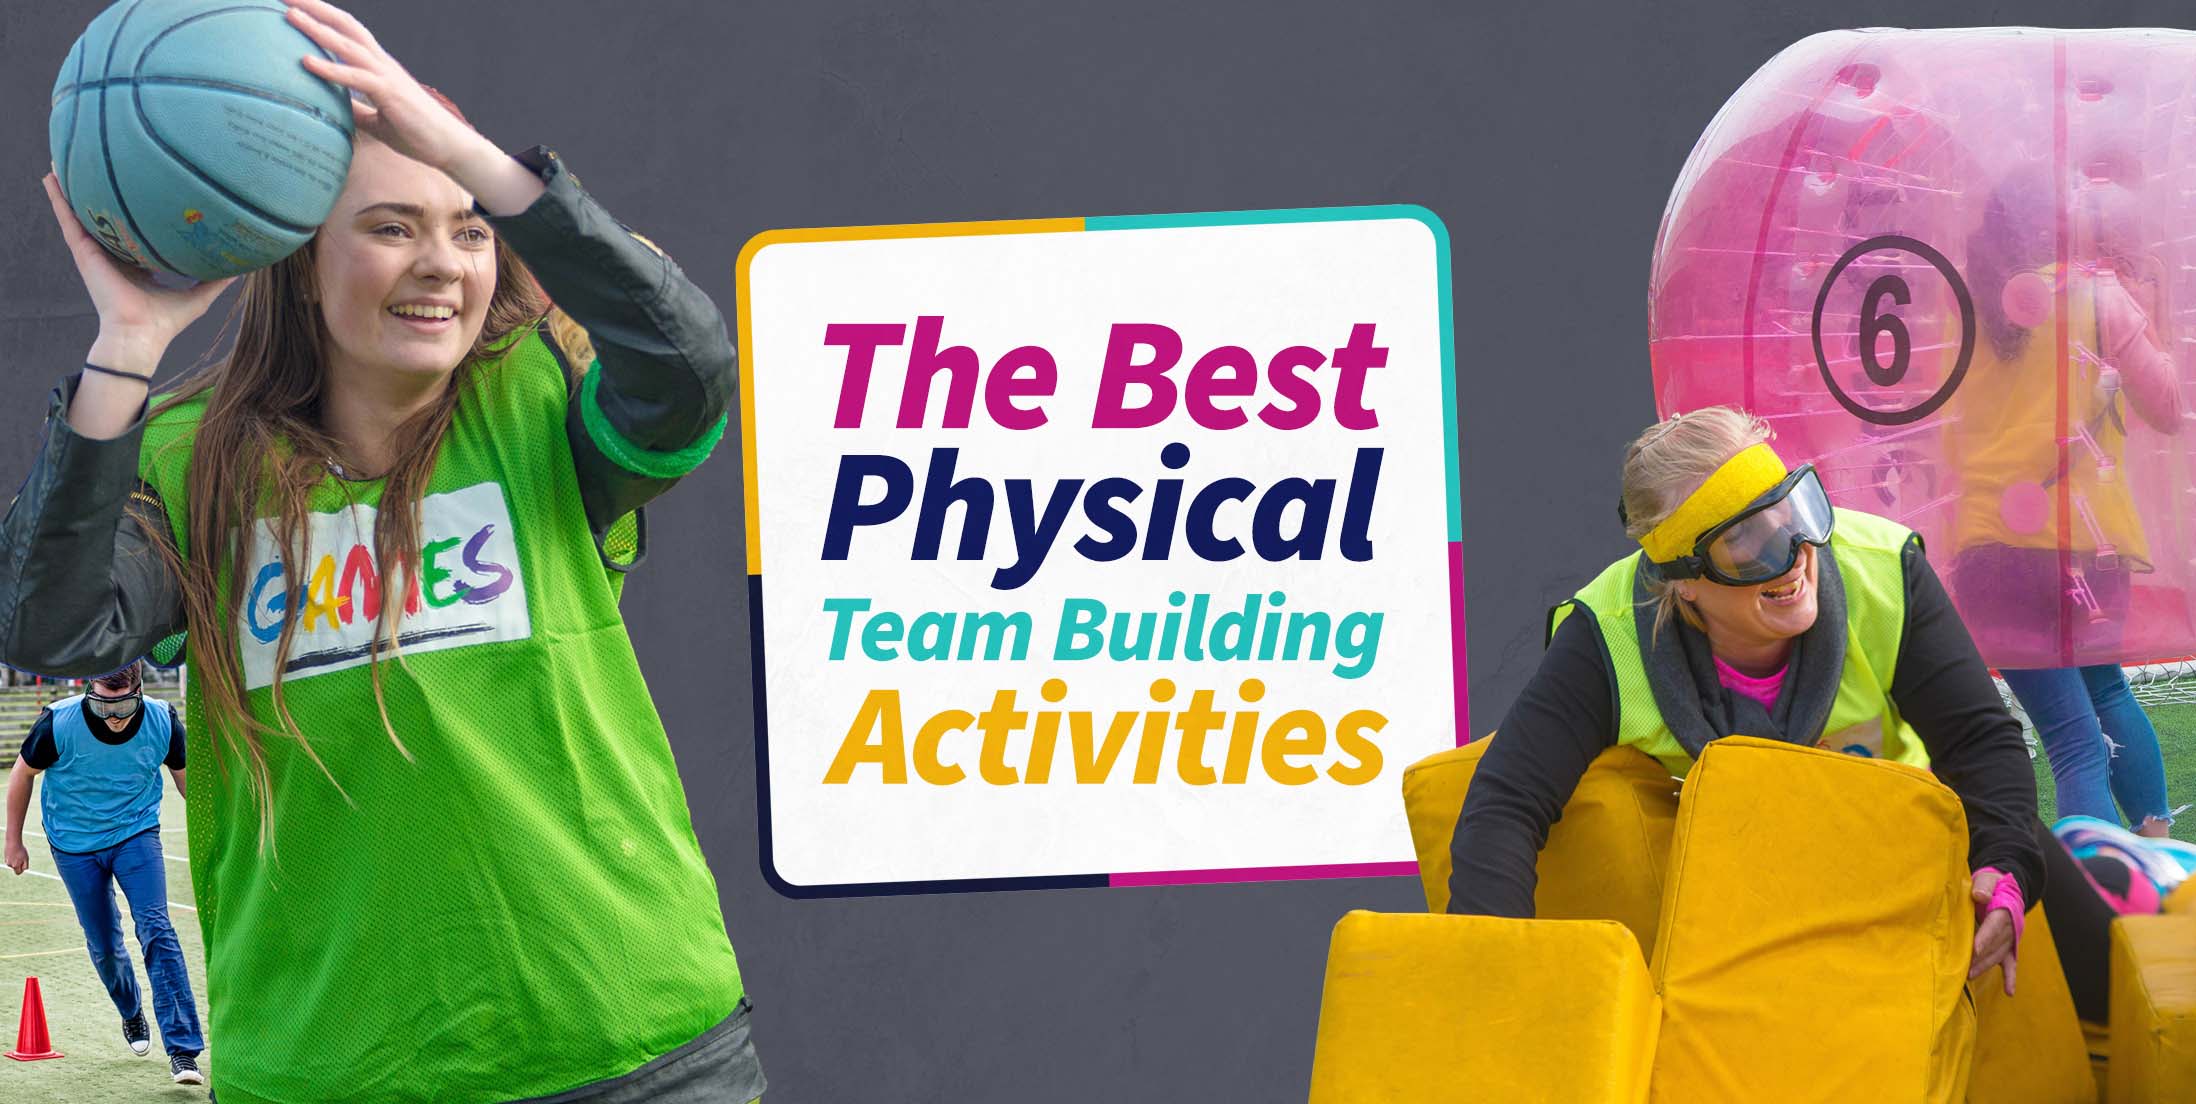 The Best Physical Team Building Activities